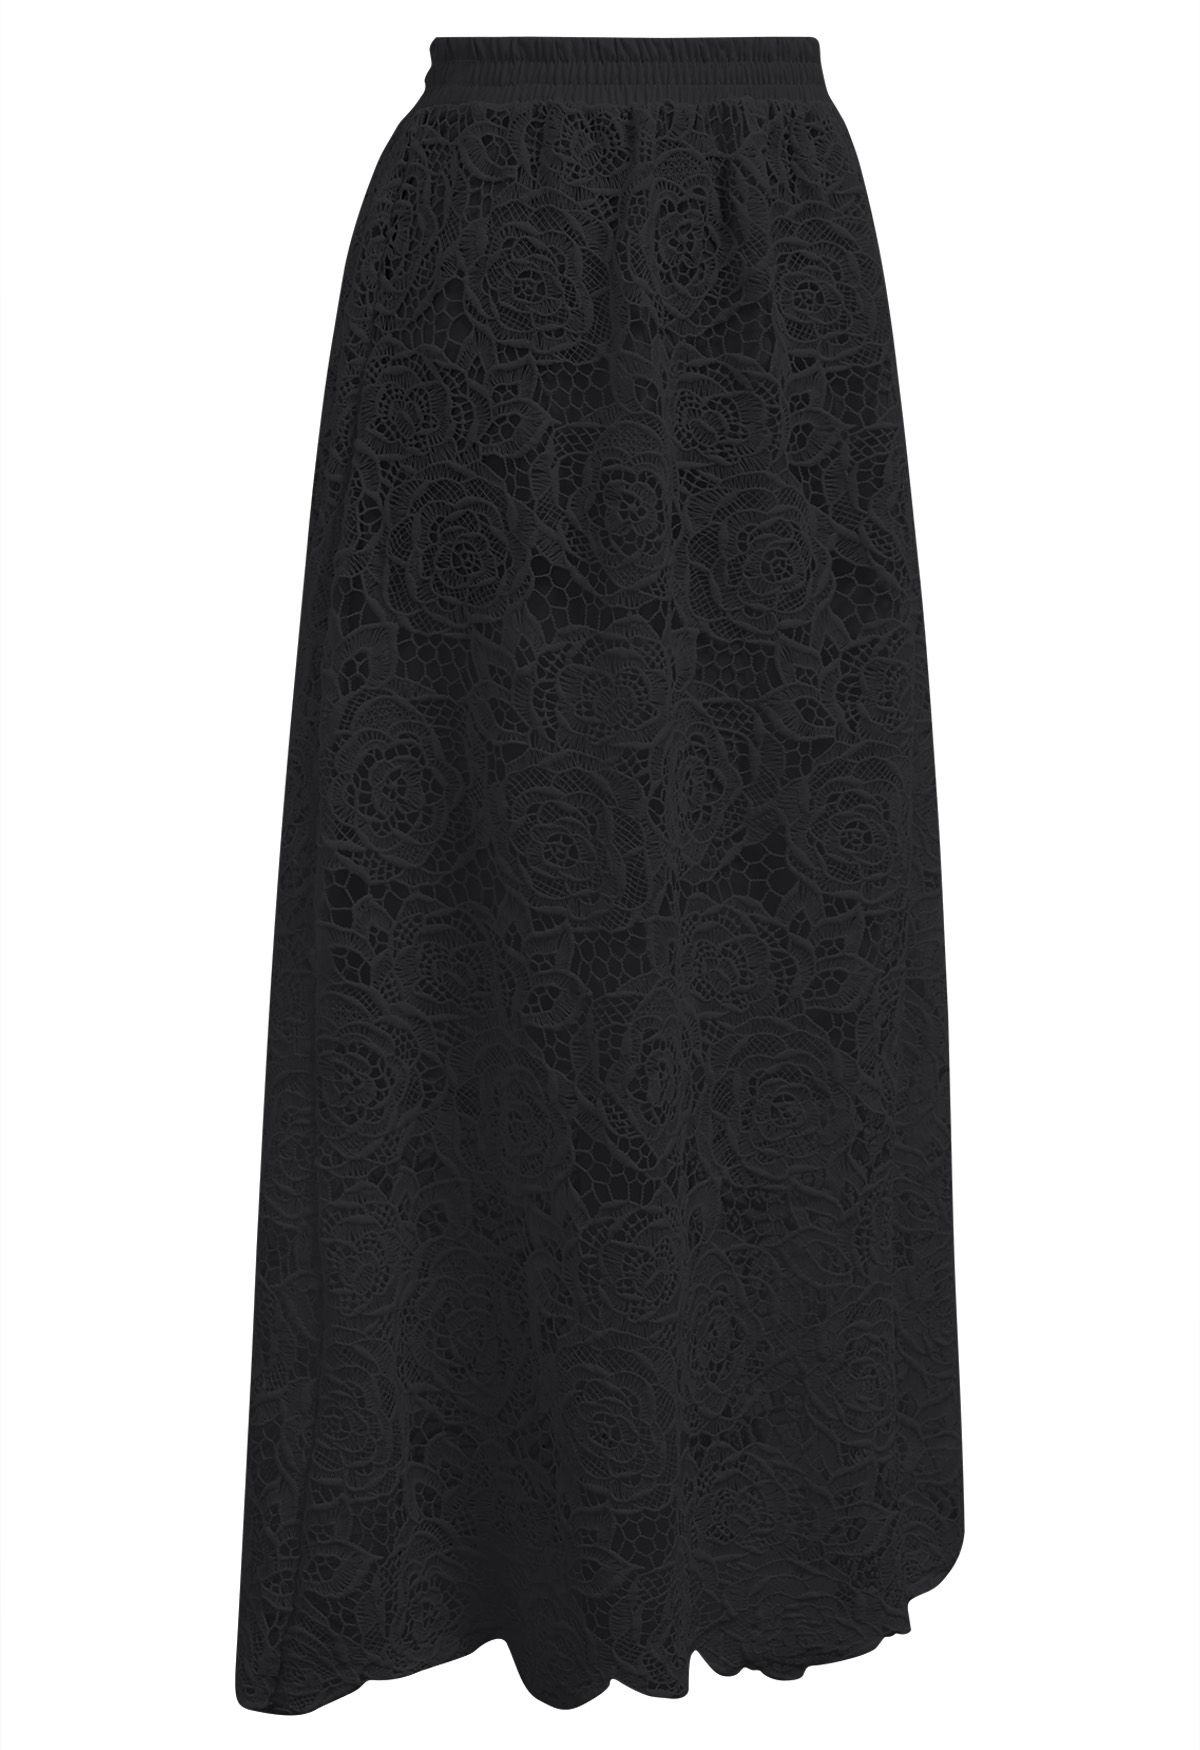 Exquisite Rose Cutwork Lace Maxi Skirt in Black